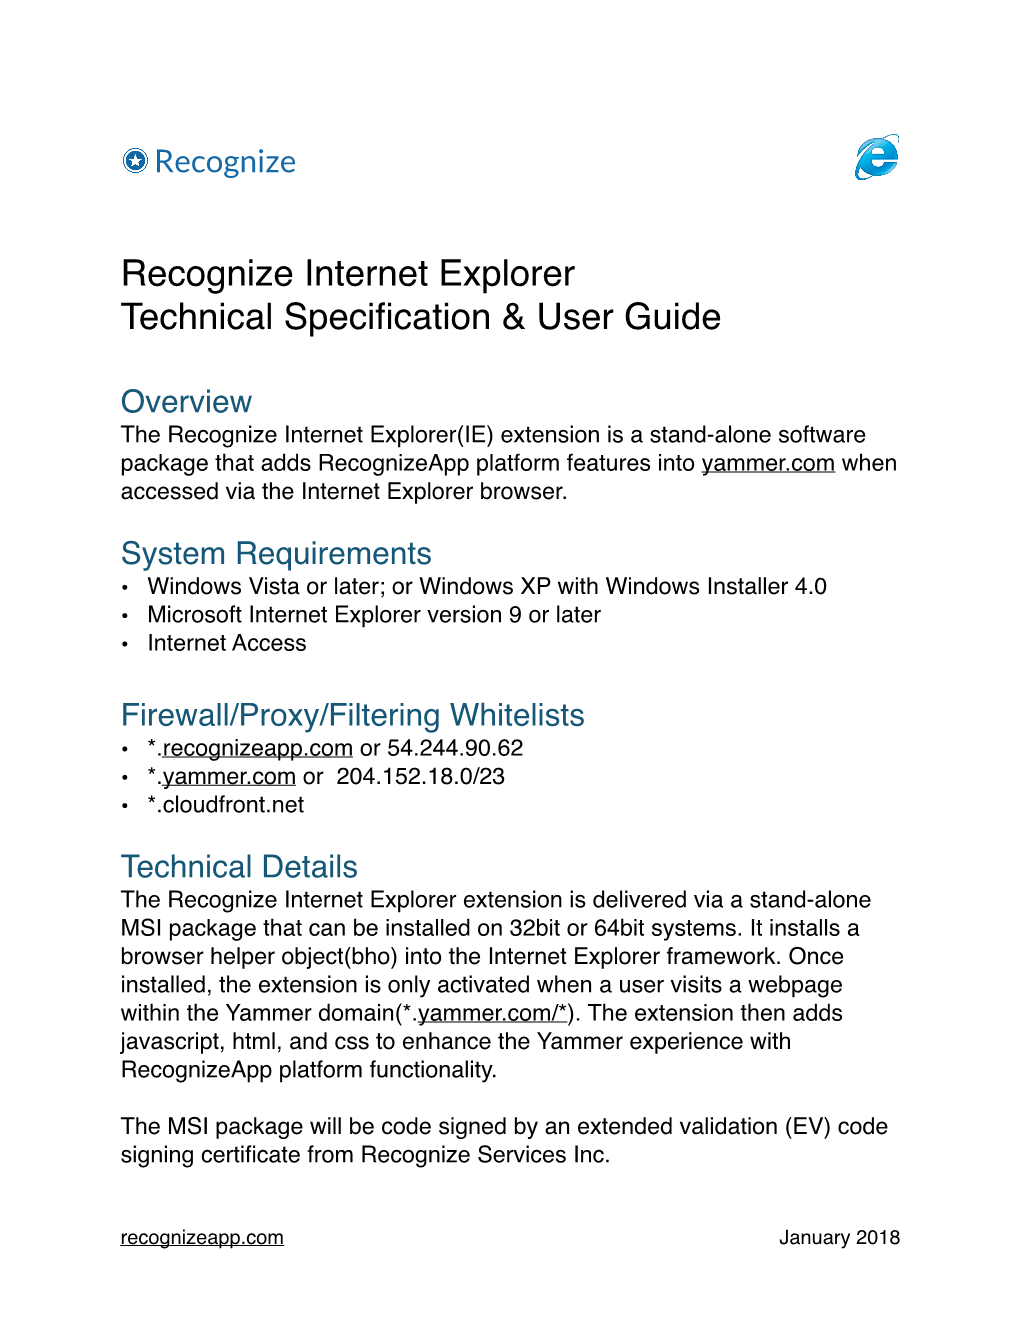 IE Extension Yammer Guide